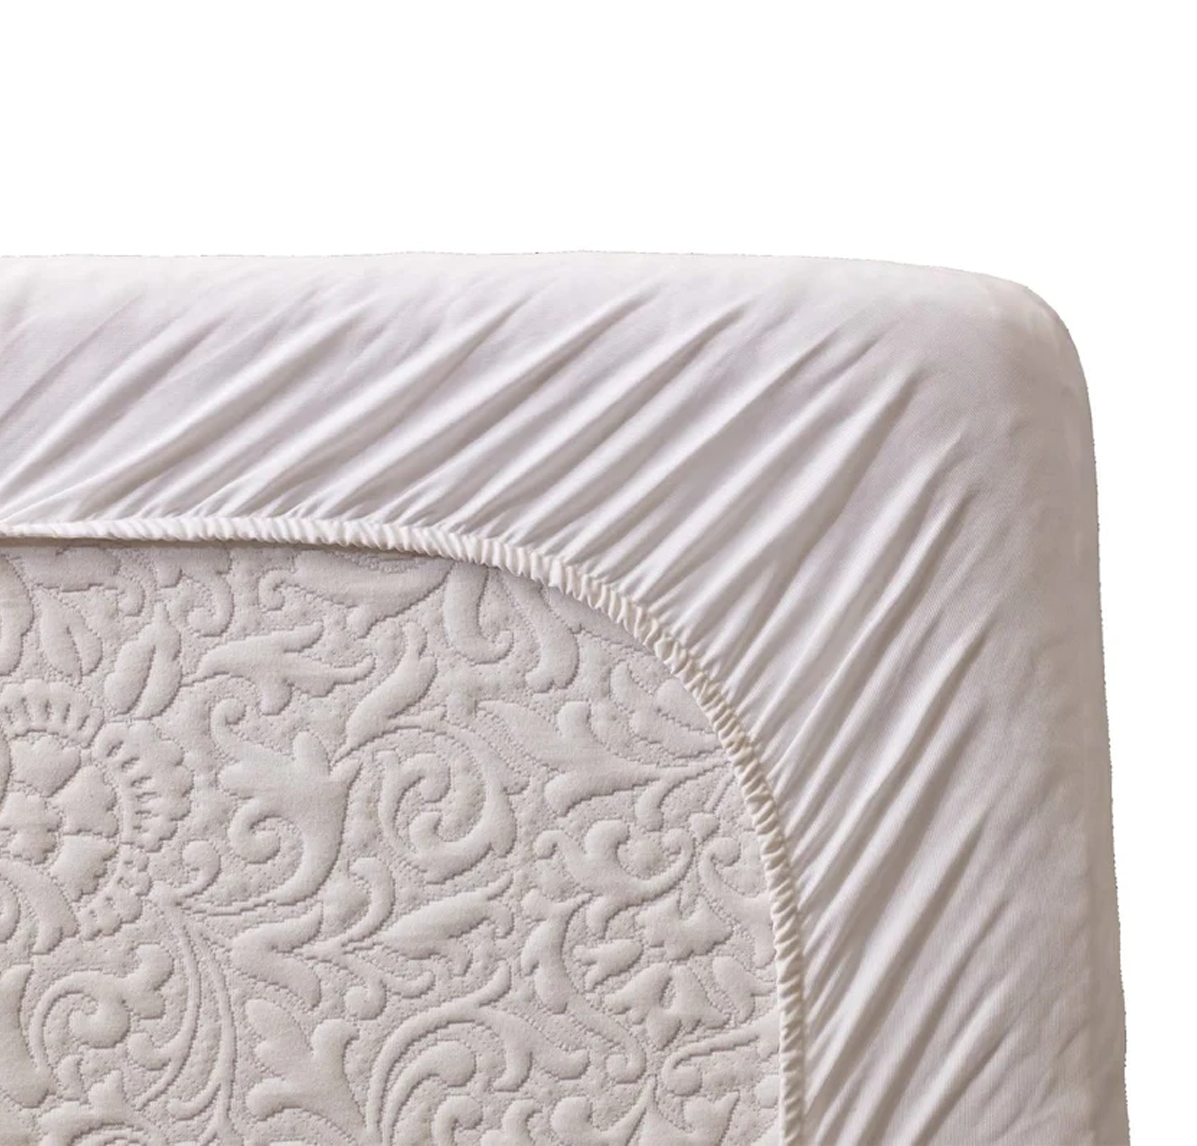 The Best Waterproof Mattress Protectors and Pads